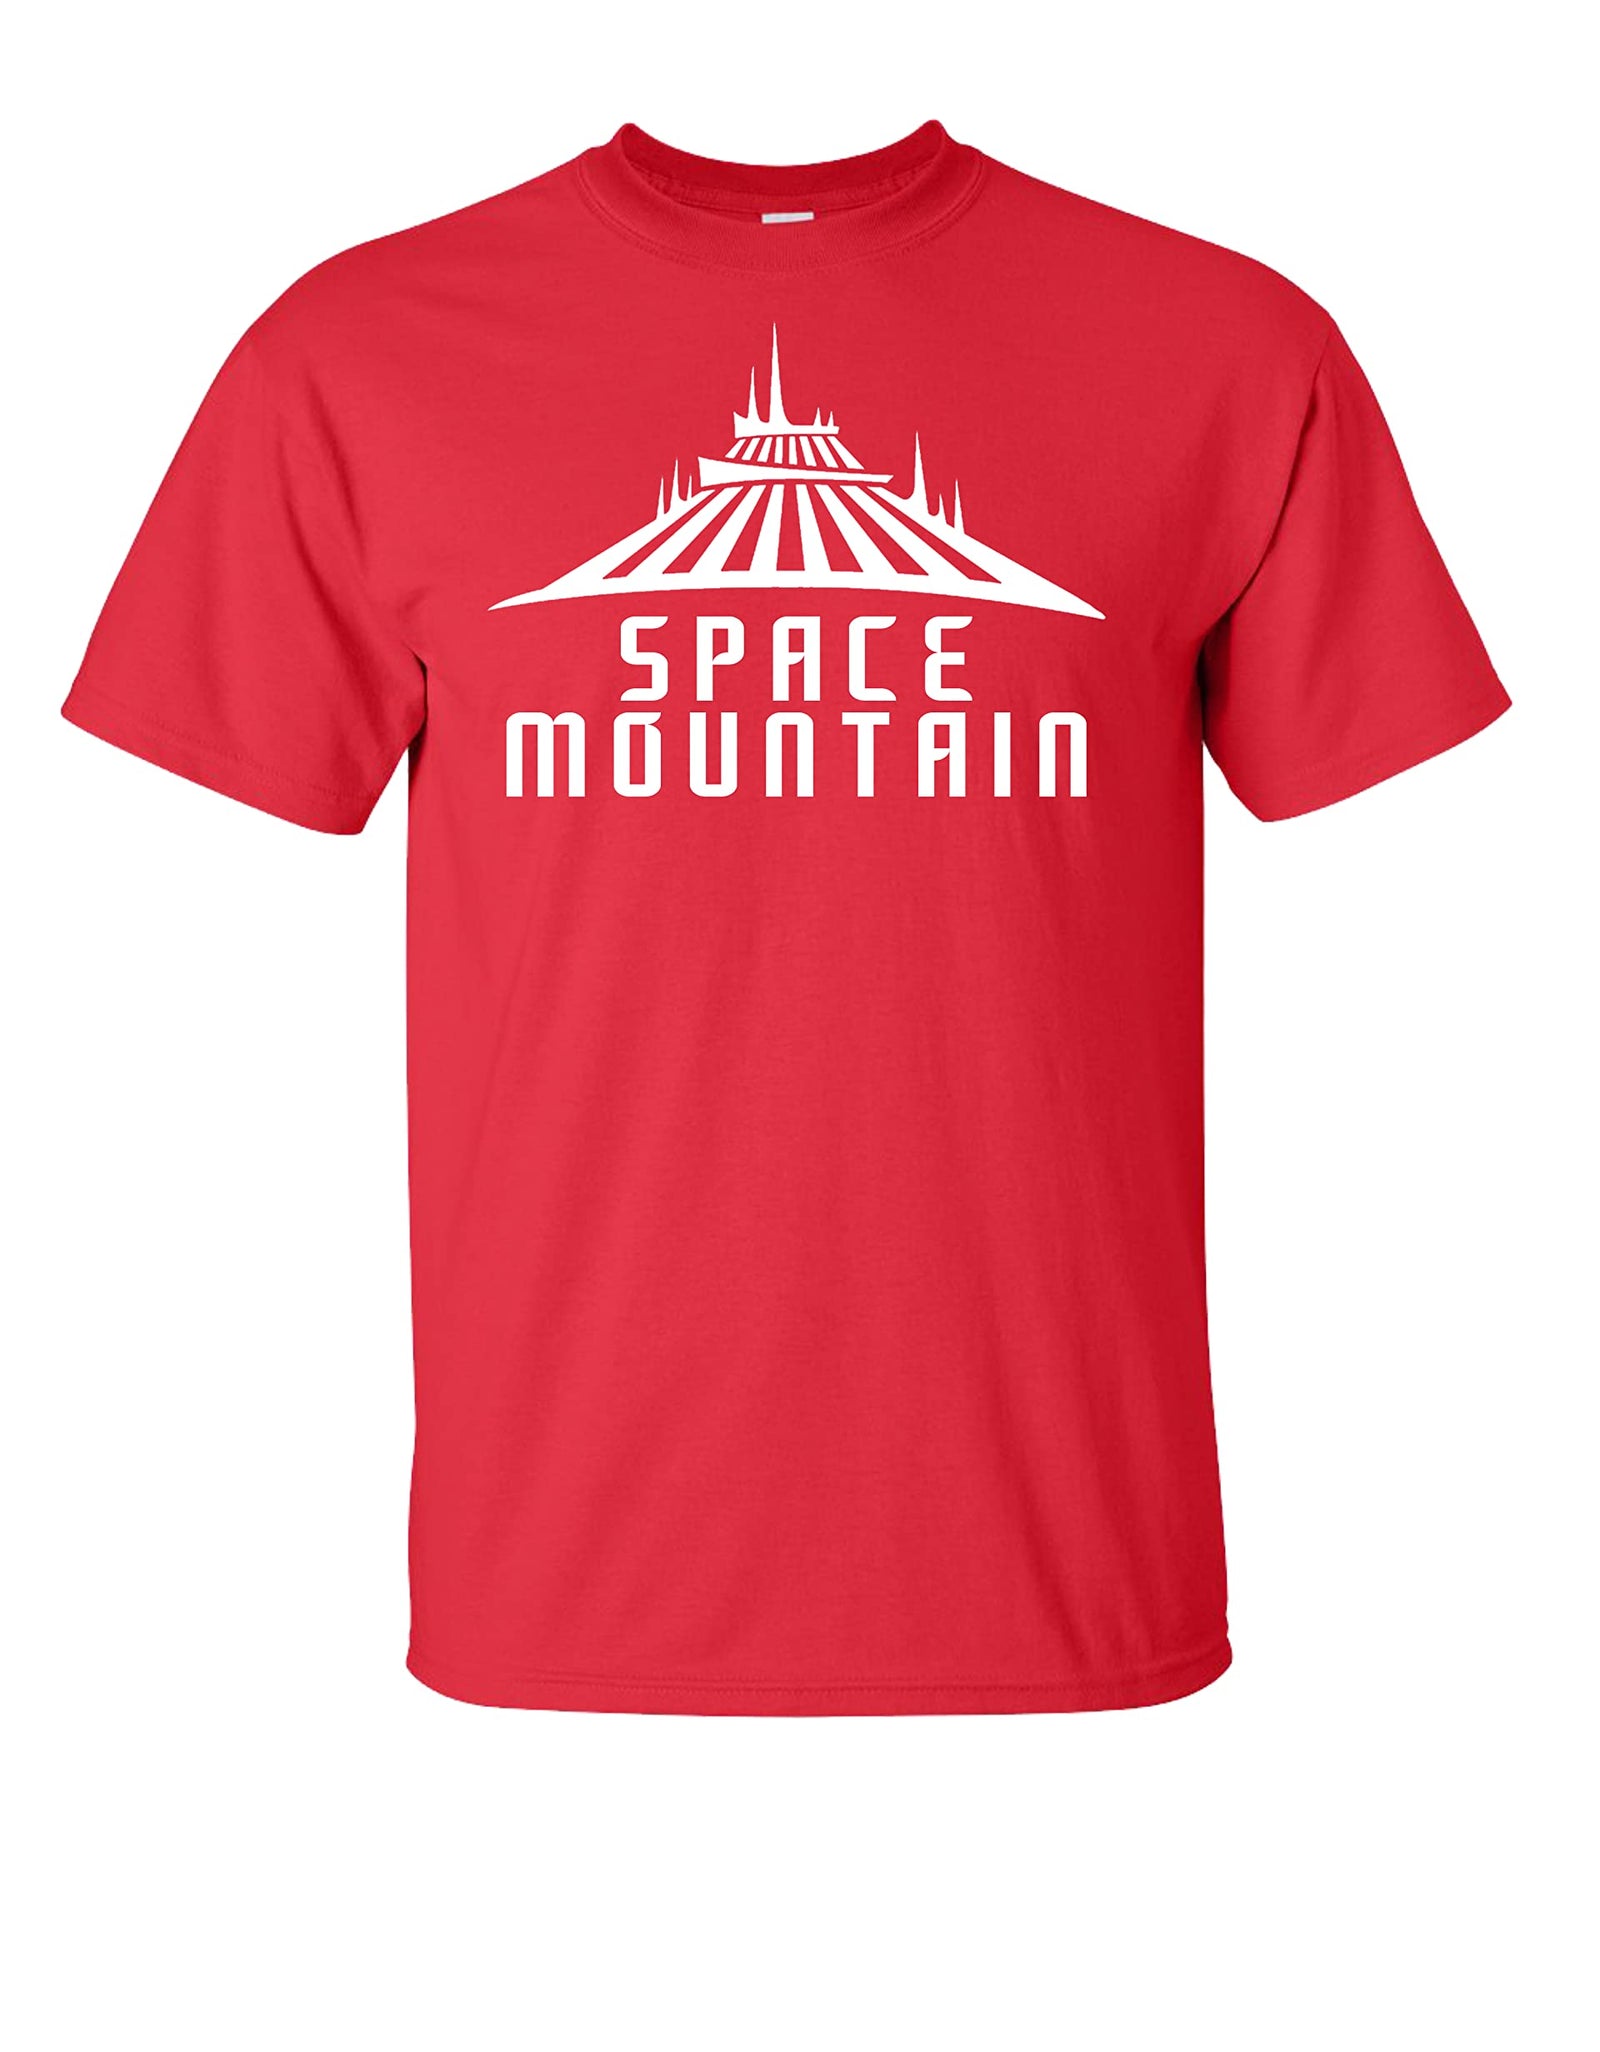 Space Mountain Classic Design Parks Inspired T-Shirt (Youth Large, Navy Blue)